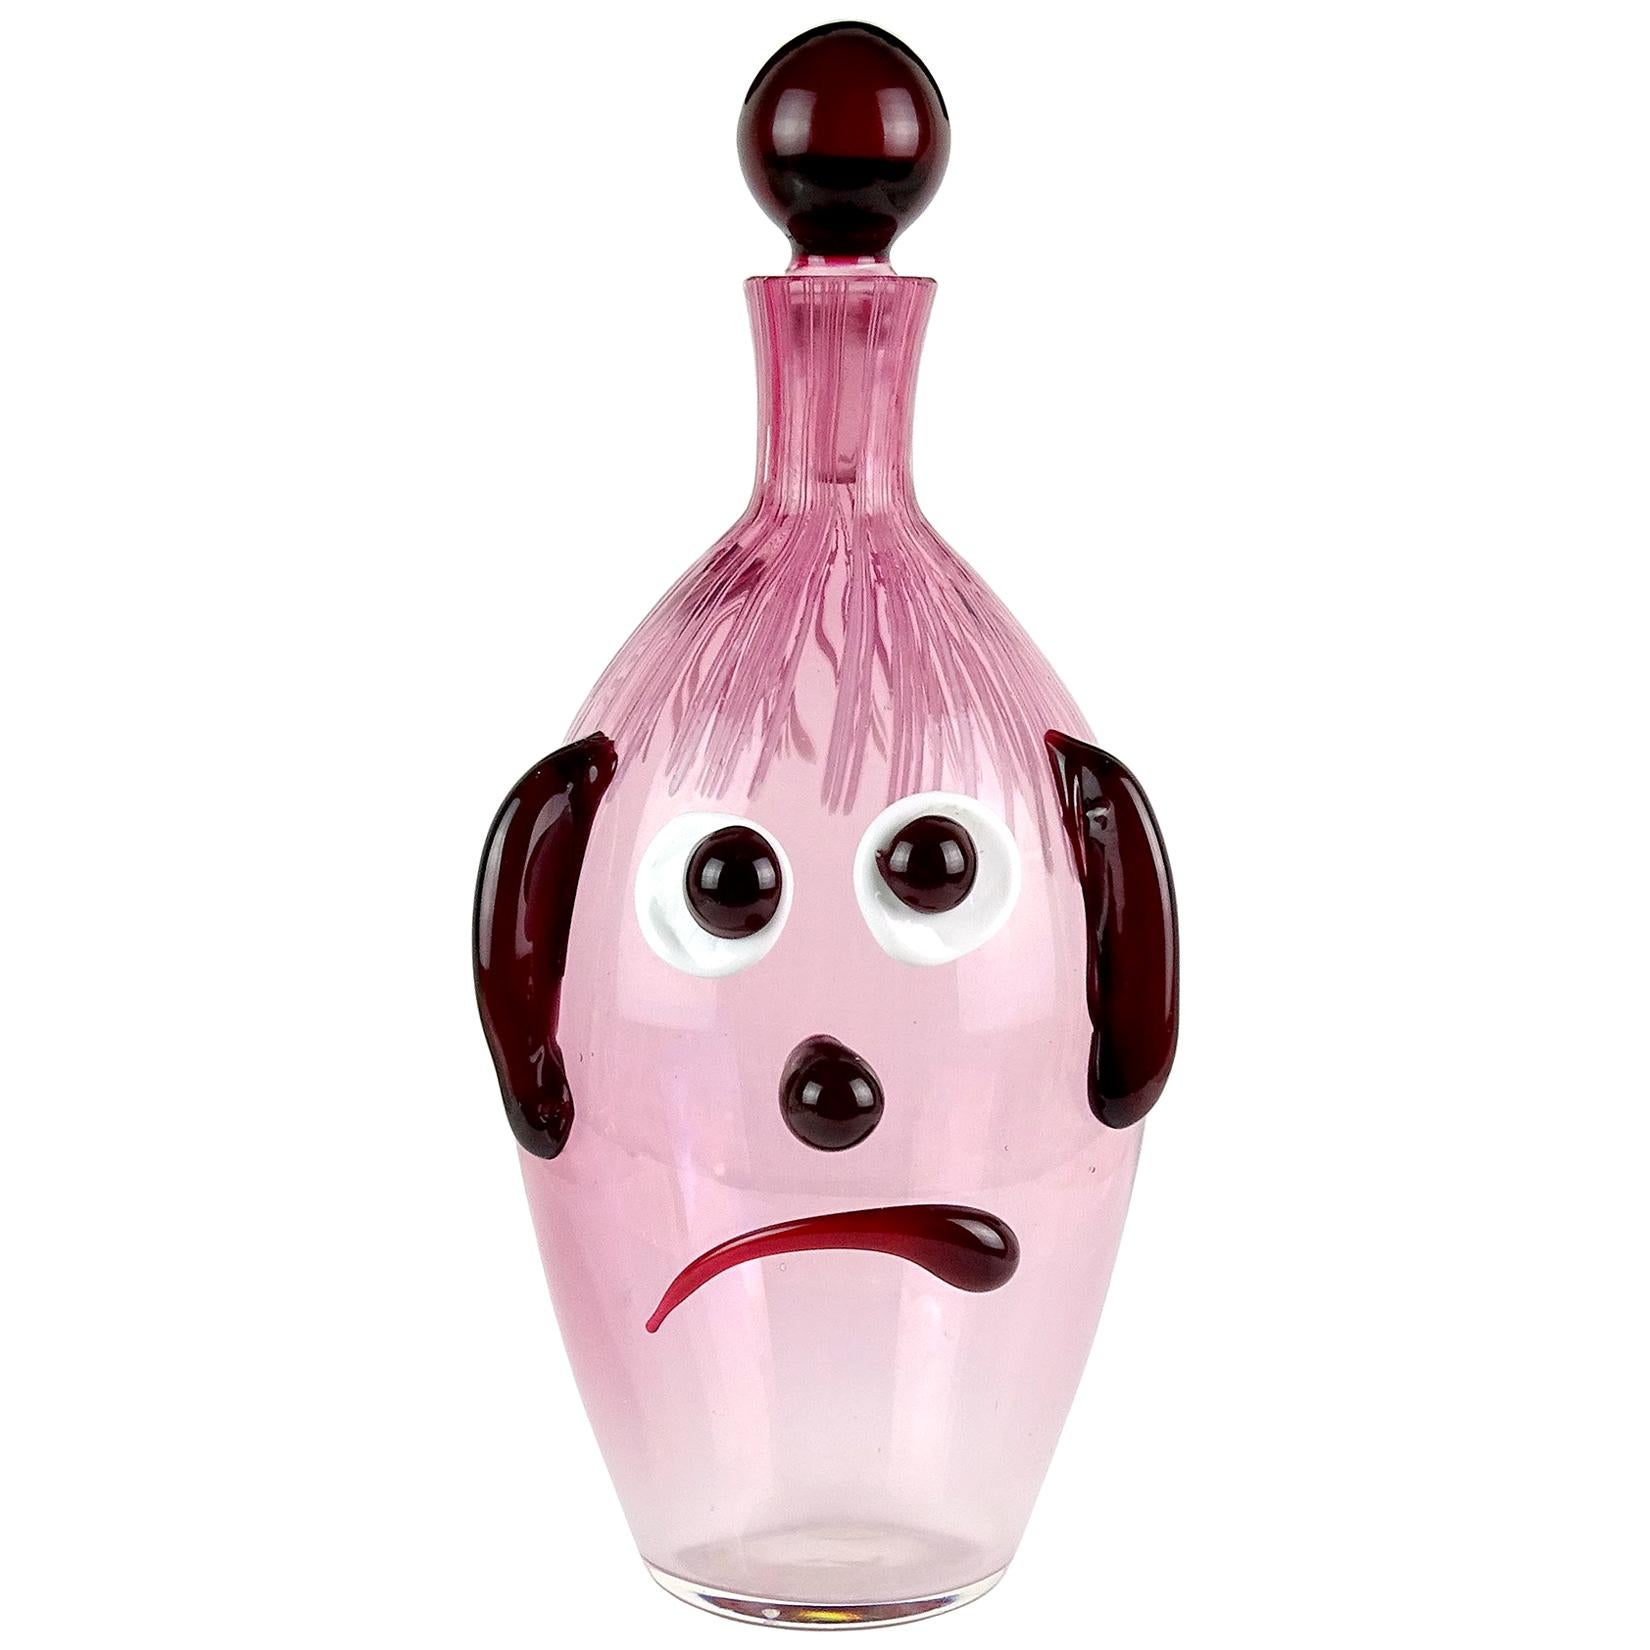 Fratelli Toso Murano Midcentury Pink Red Clown Face Italian Art Glass Decanter